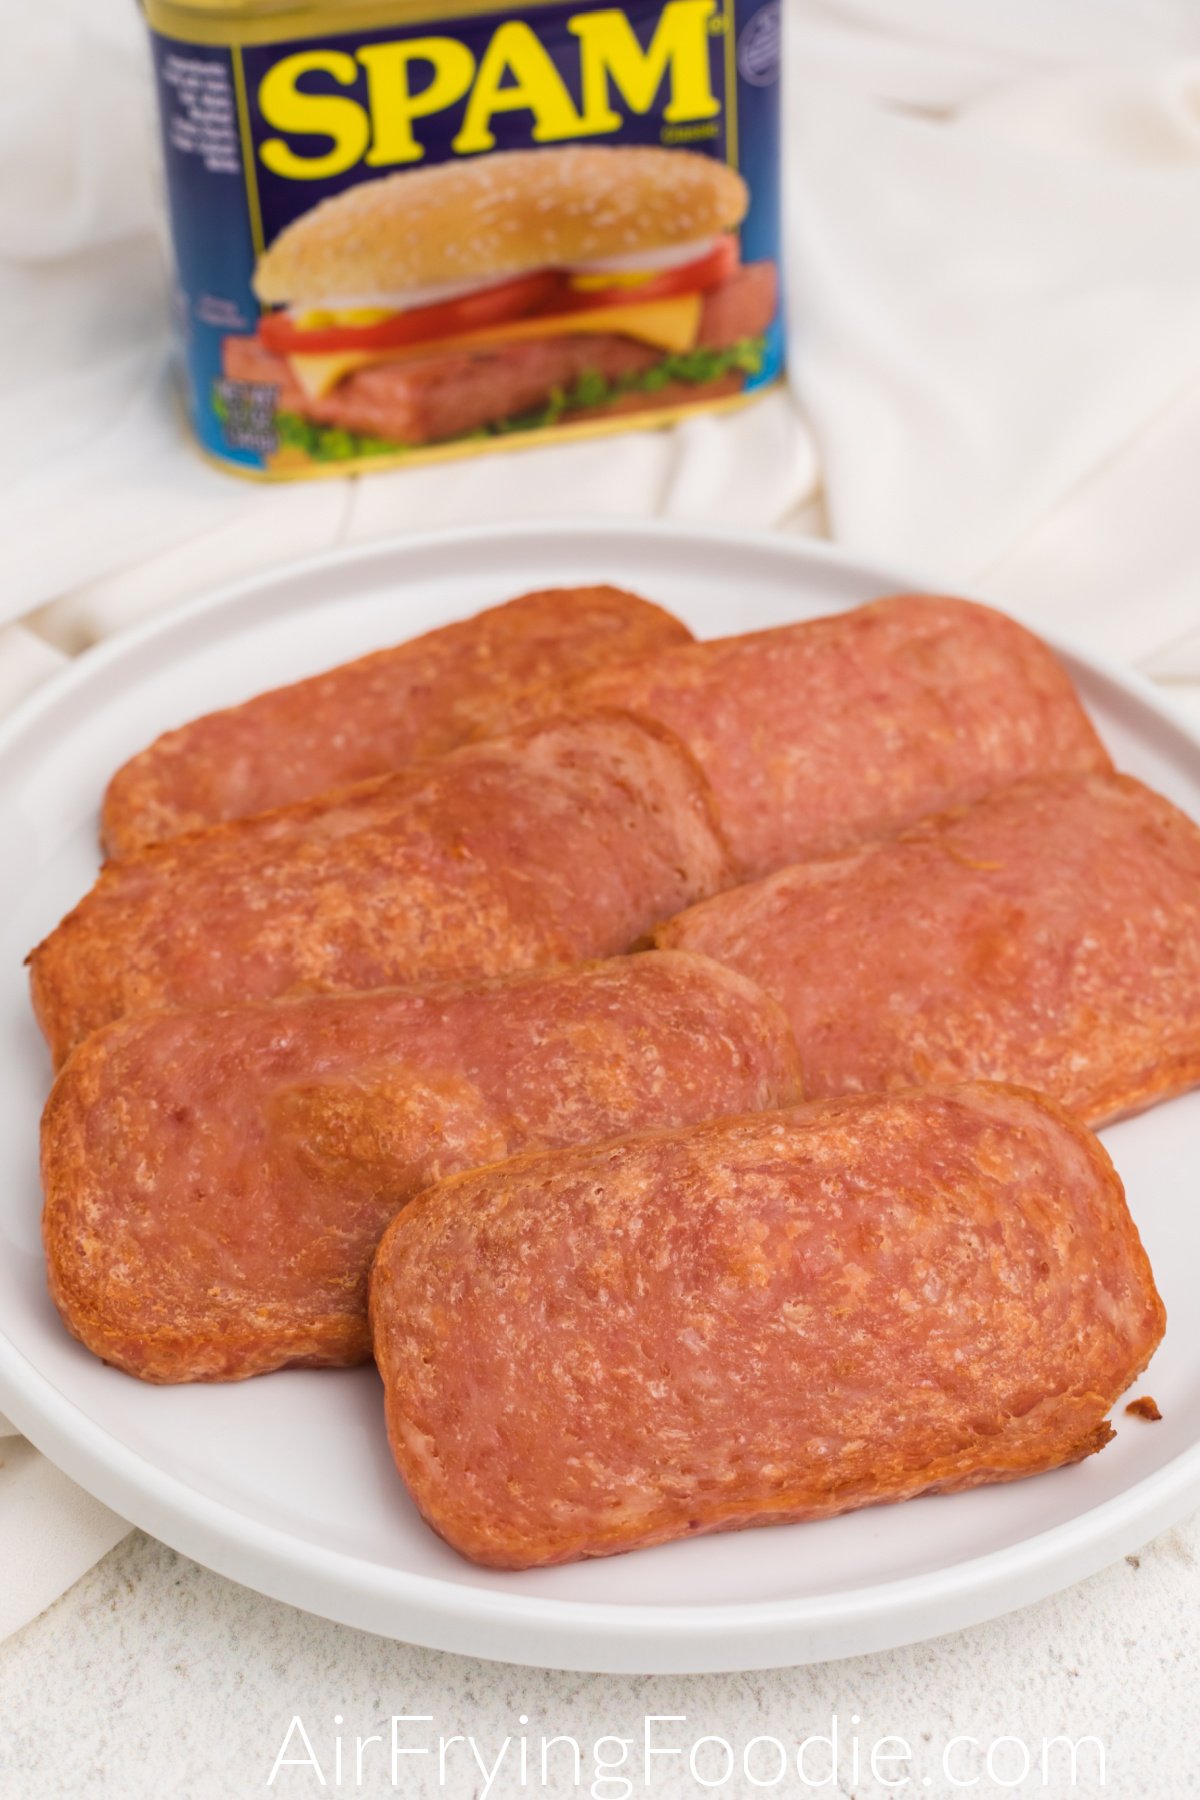 Slices of cooked Spam made in the air fryer and served on a white plate. 